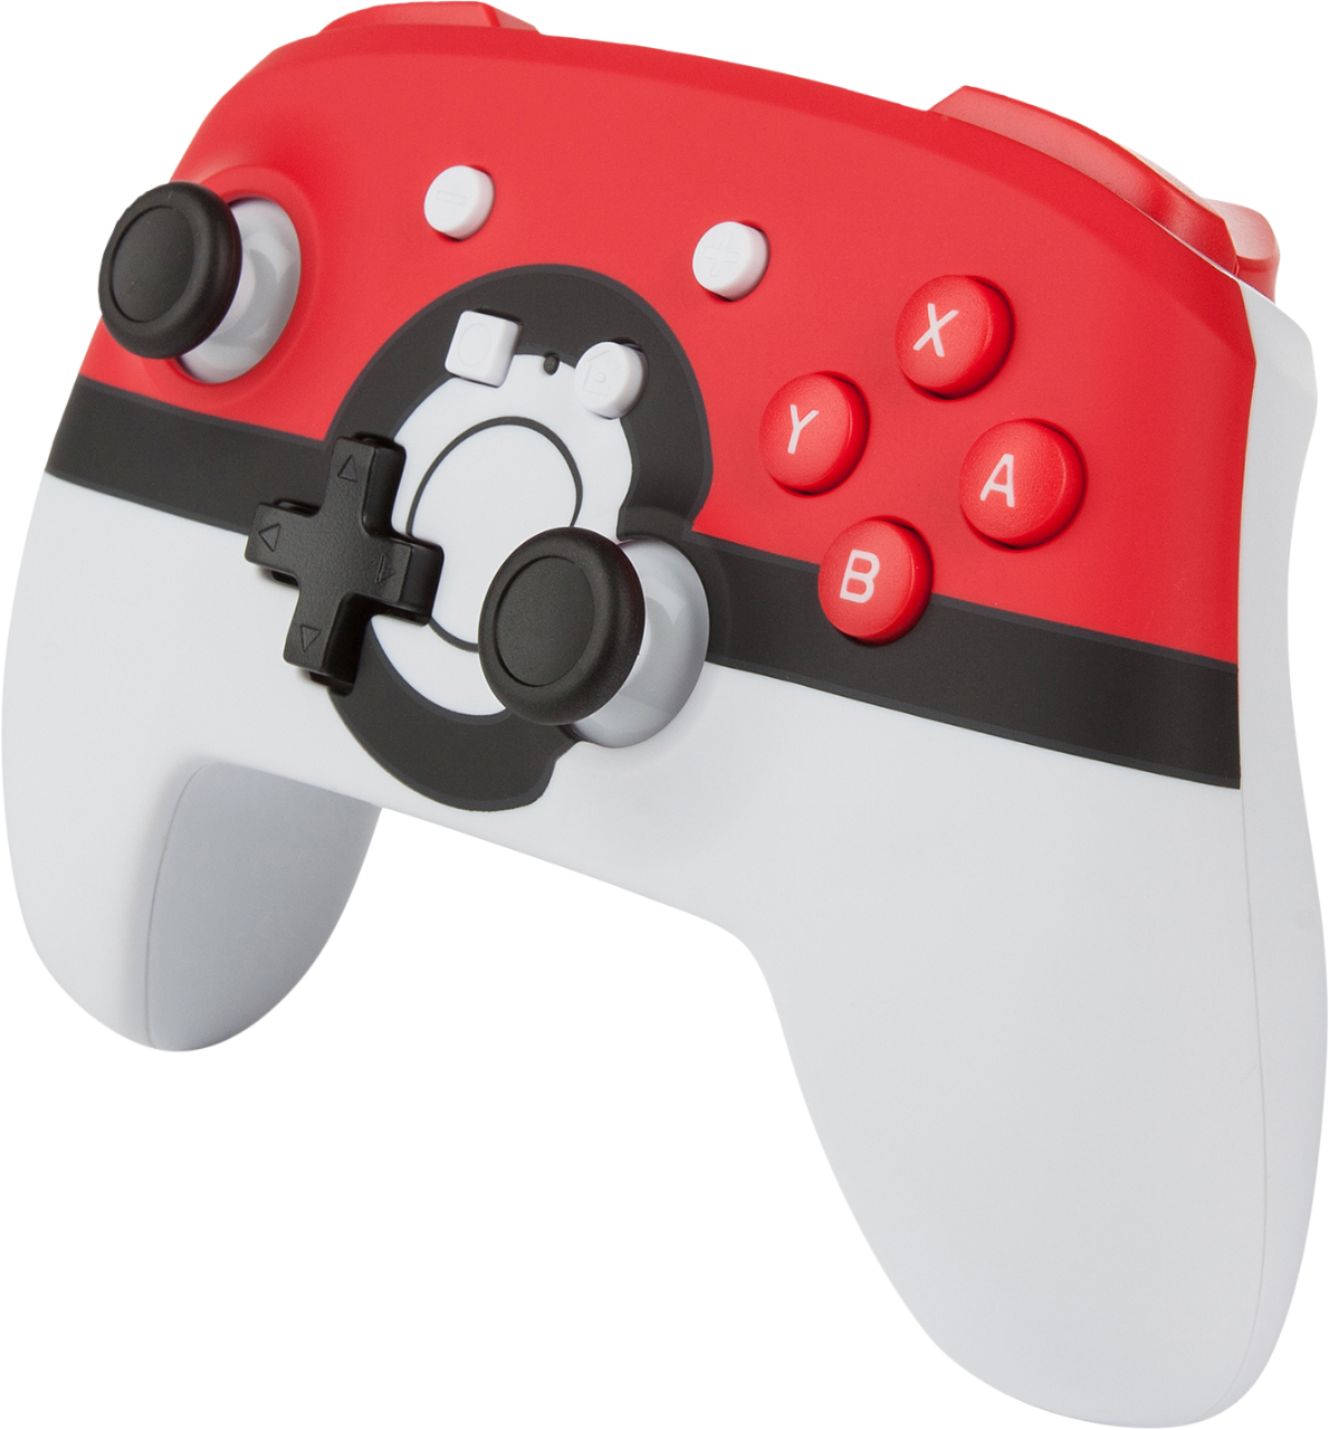 official nintendo switch wireless controller